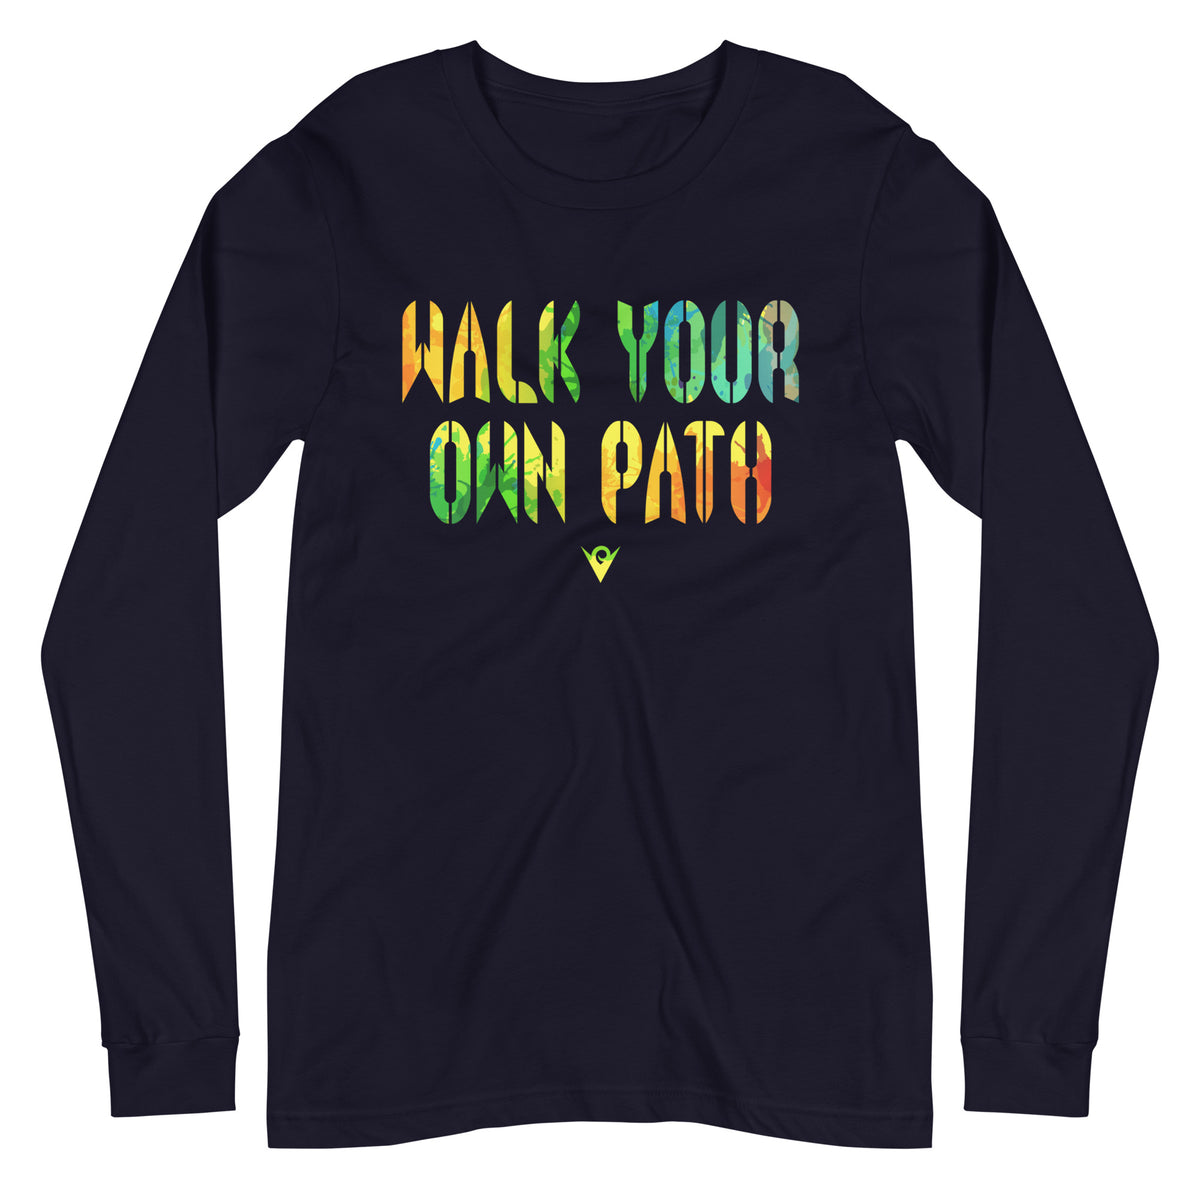 Walk Your Own Path - Picturesque (Unisex Long-Sleeve T-shirt) Excelsior